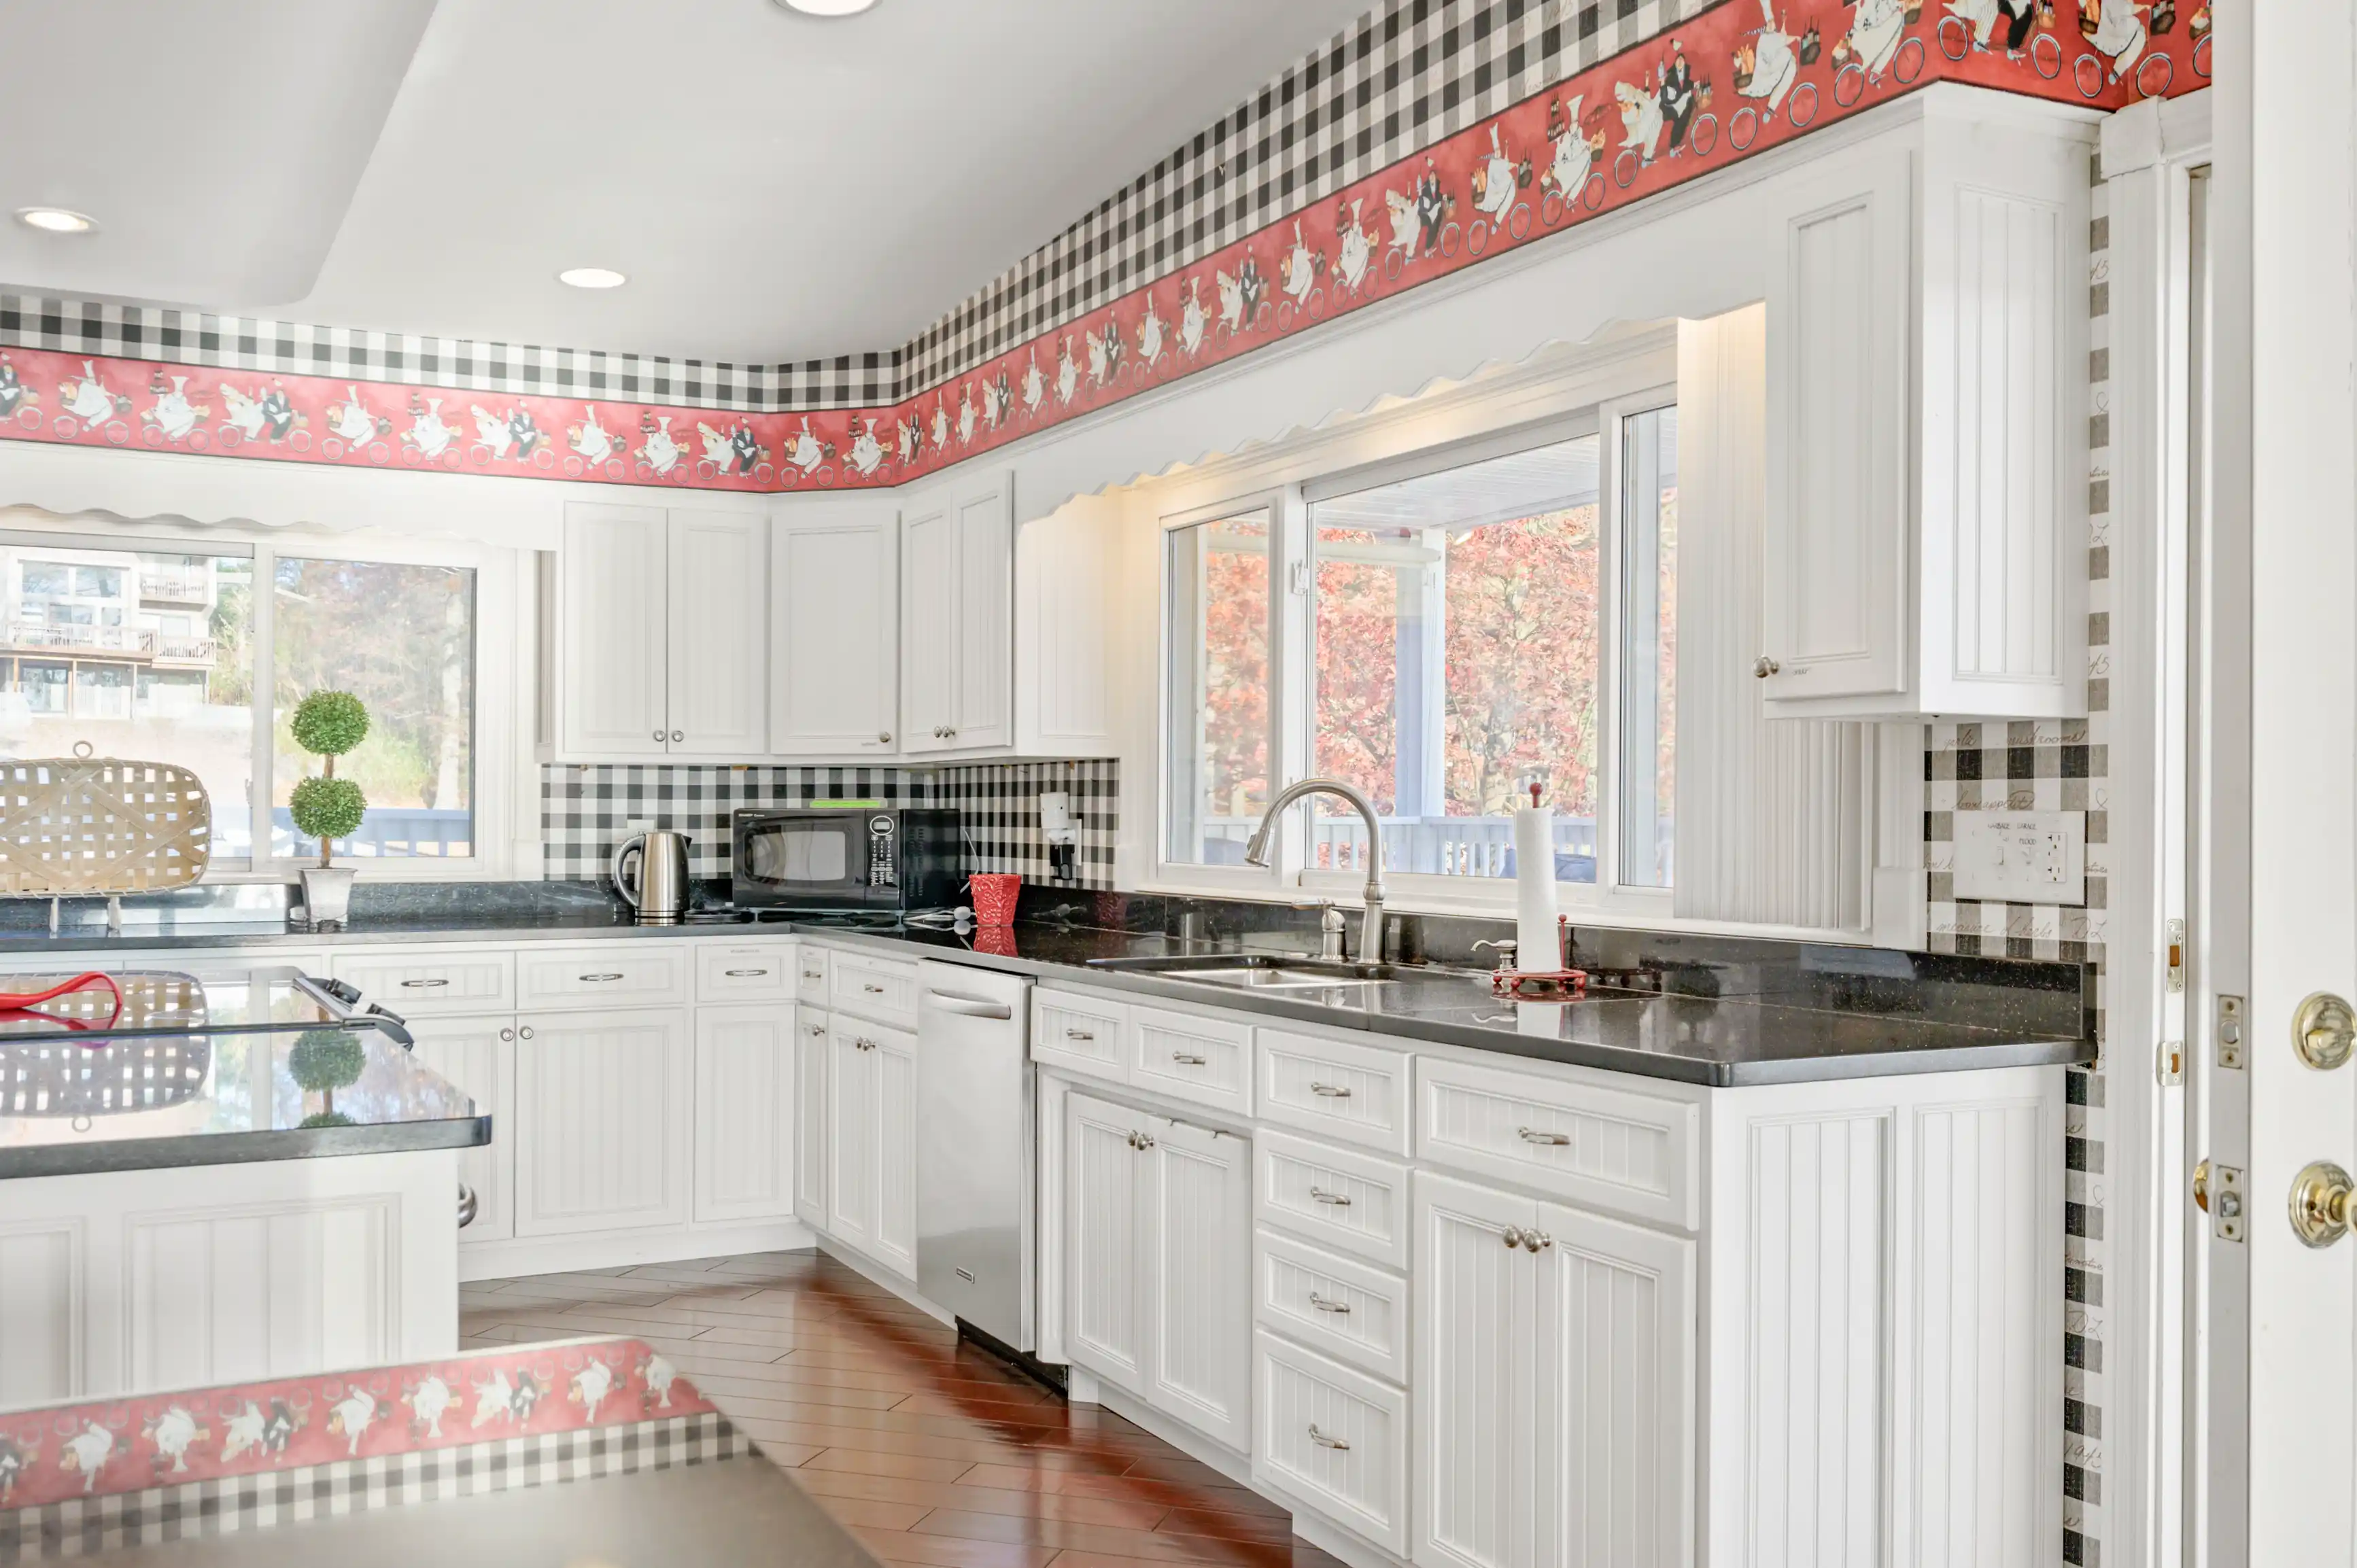 Bright kitchen interior with white cabinets, black countertops, and a checkered pattern with red accents on the border wallpaper.